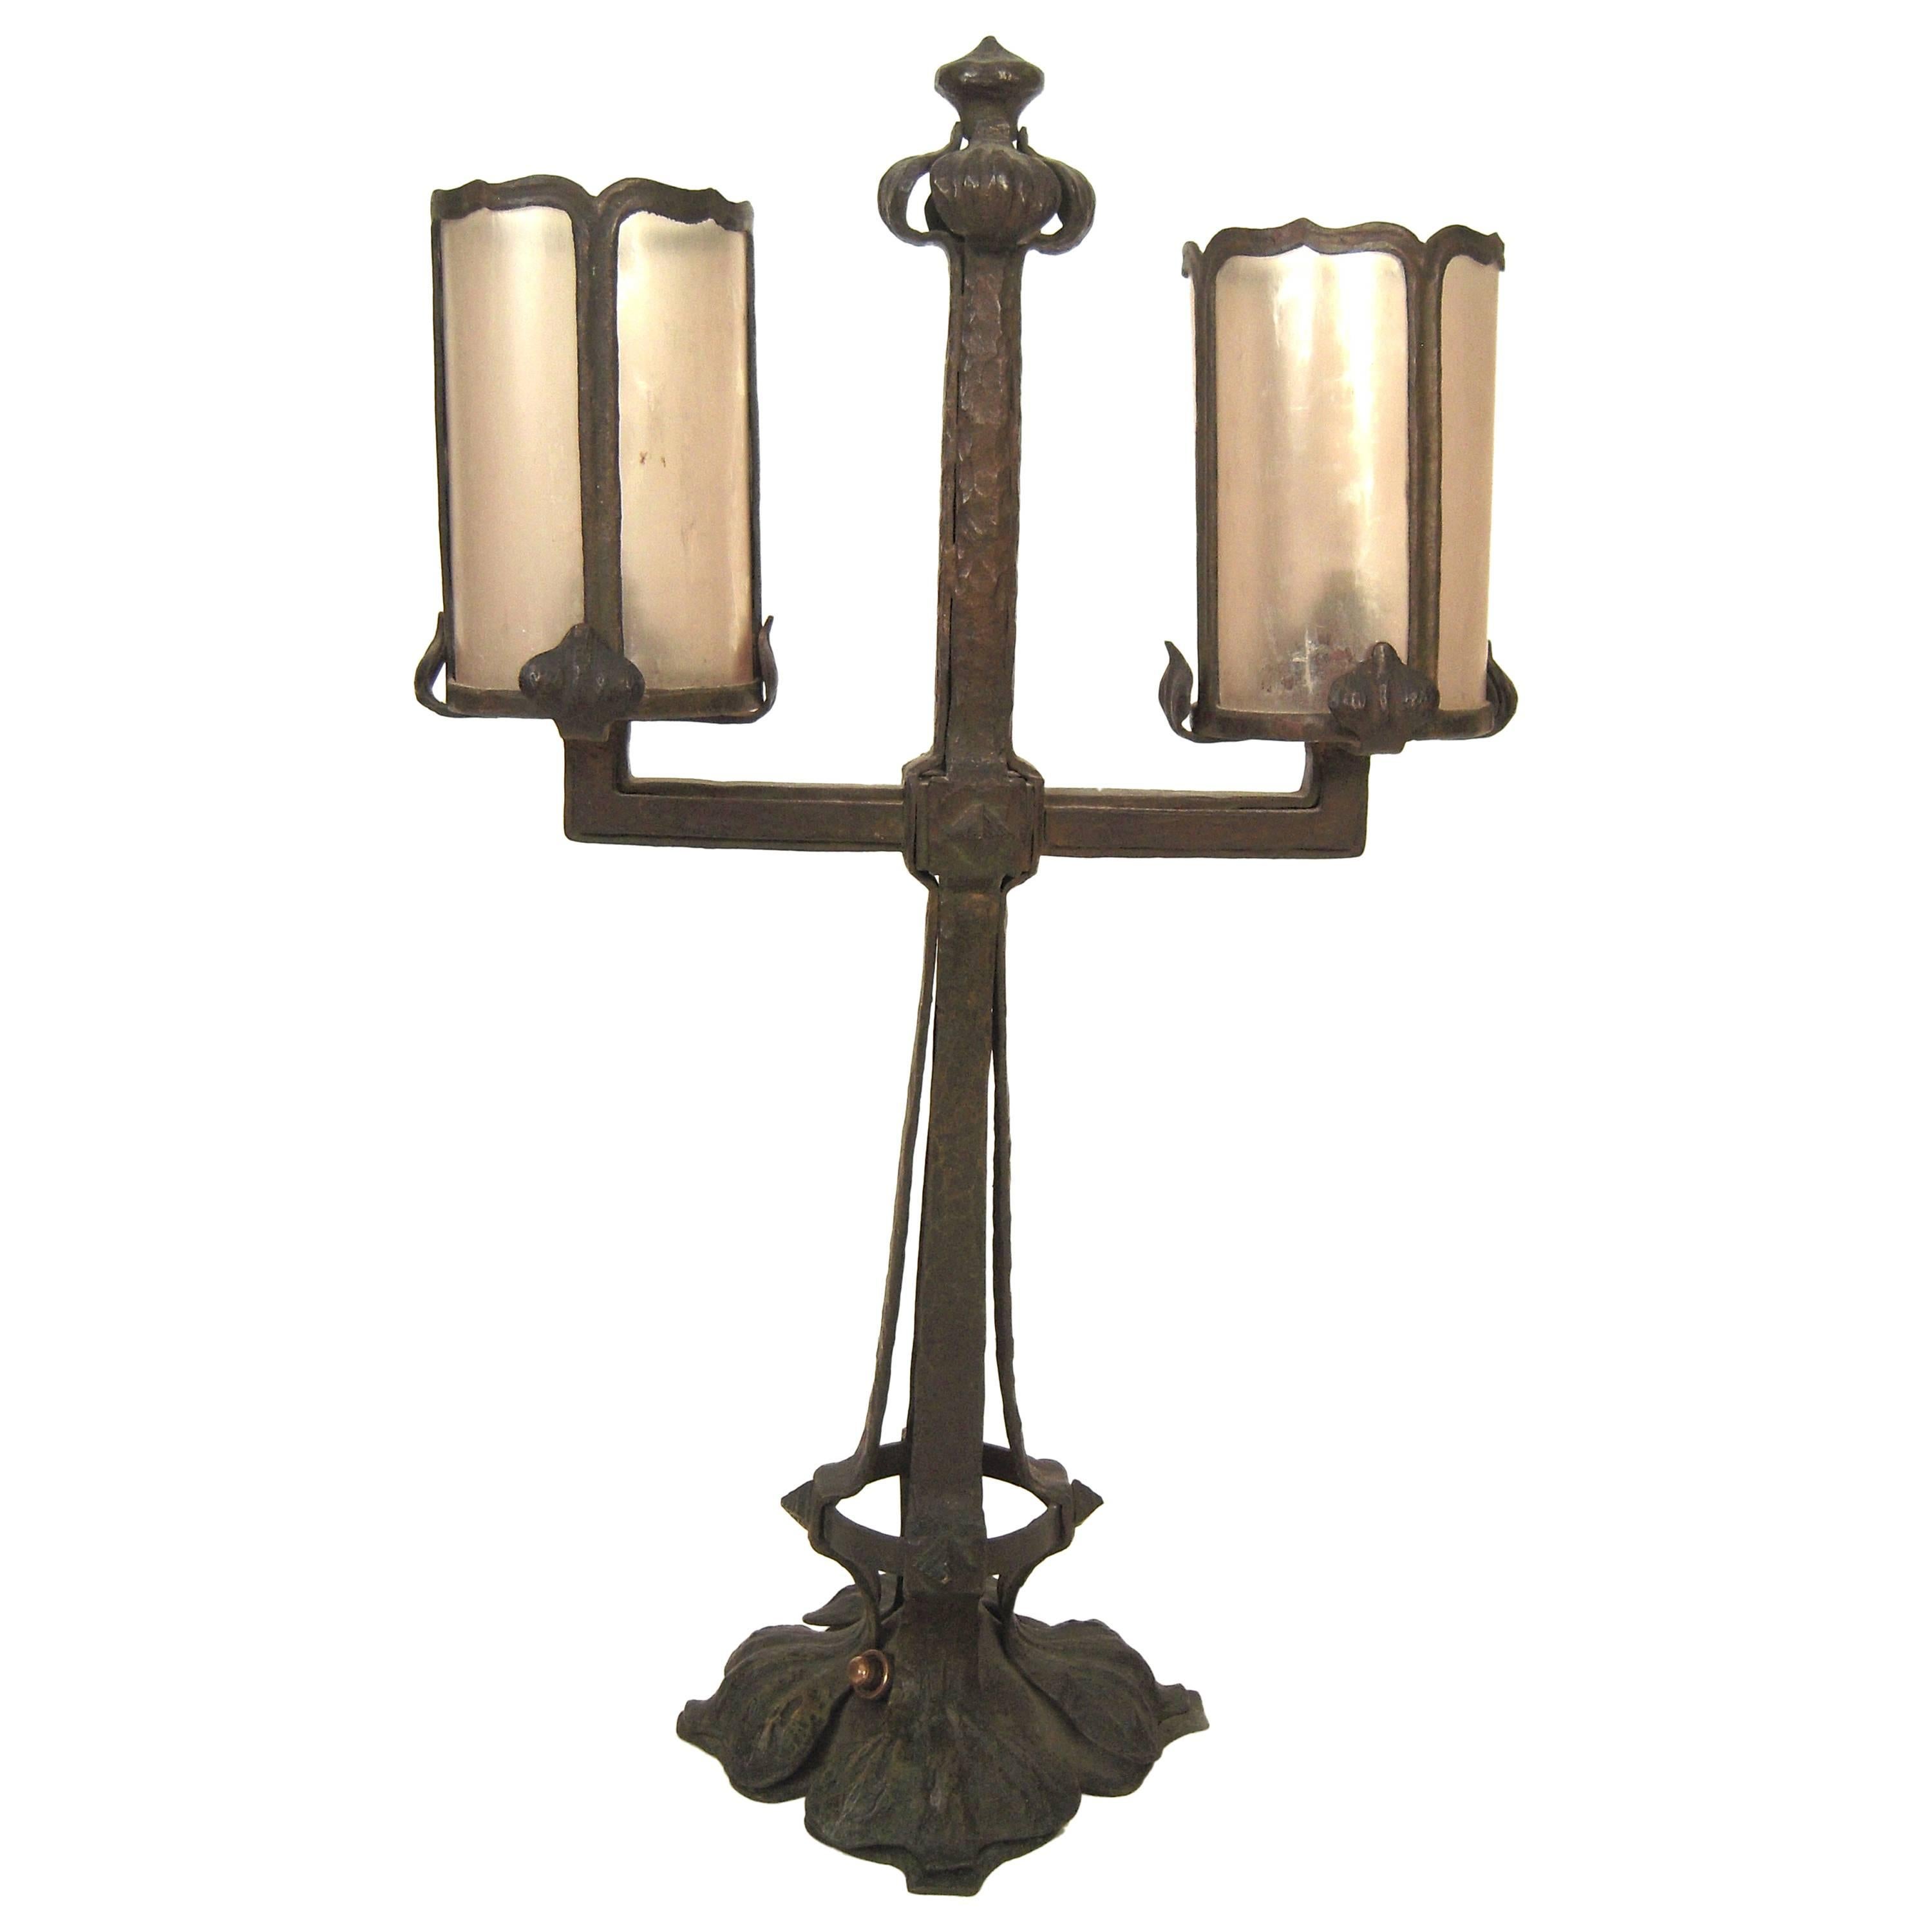 Arts and Crafts Period Wrought Iron and Mica Lamp